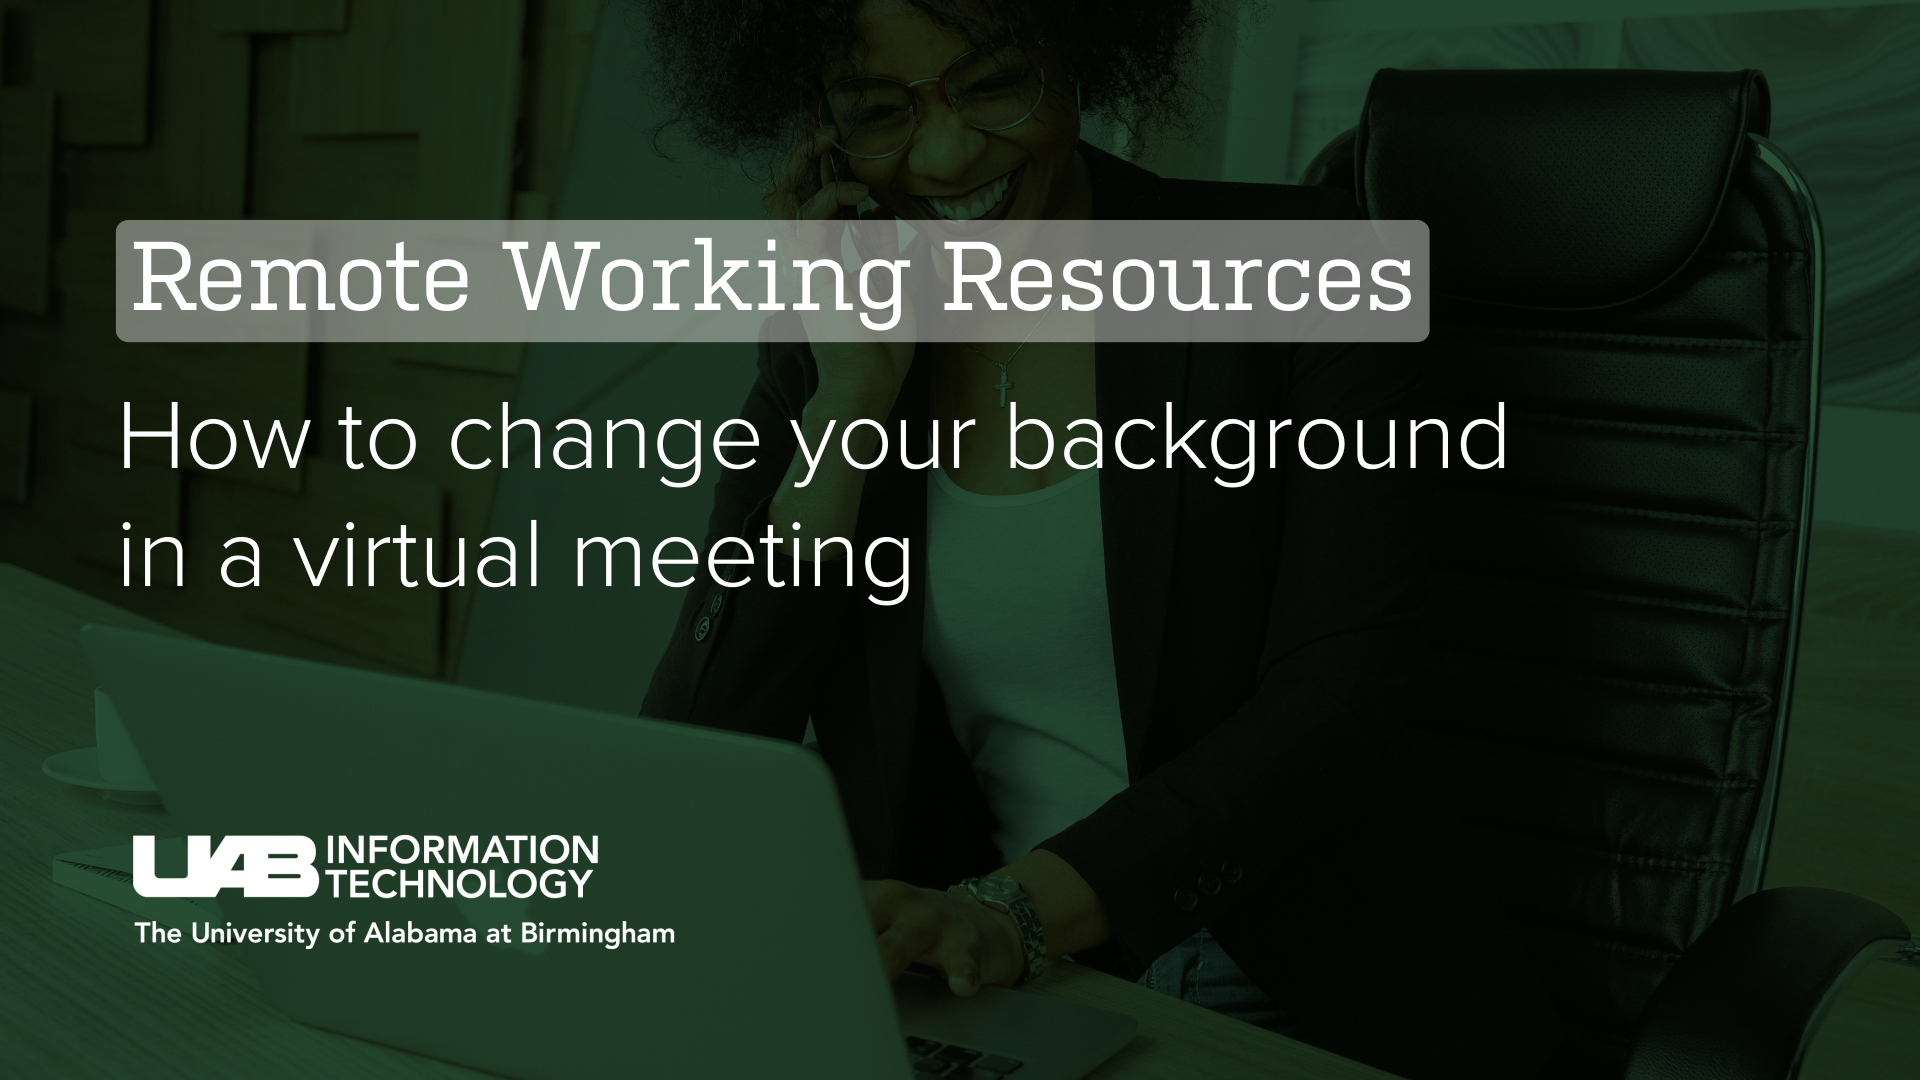 How to change your background in a virtual meeting